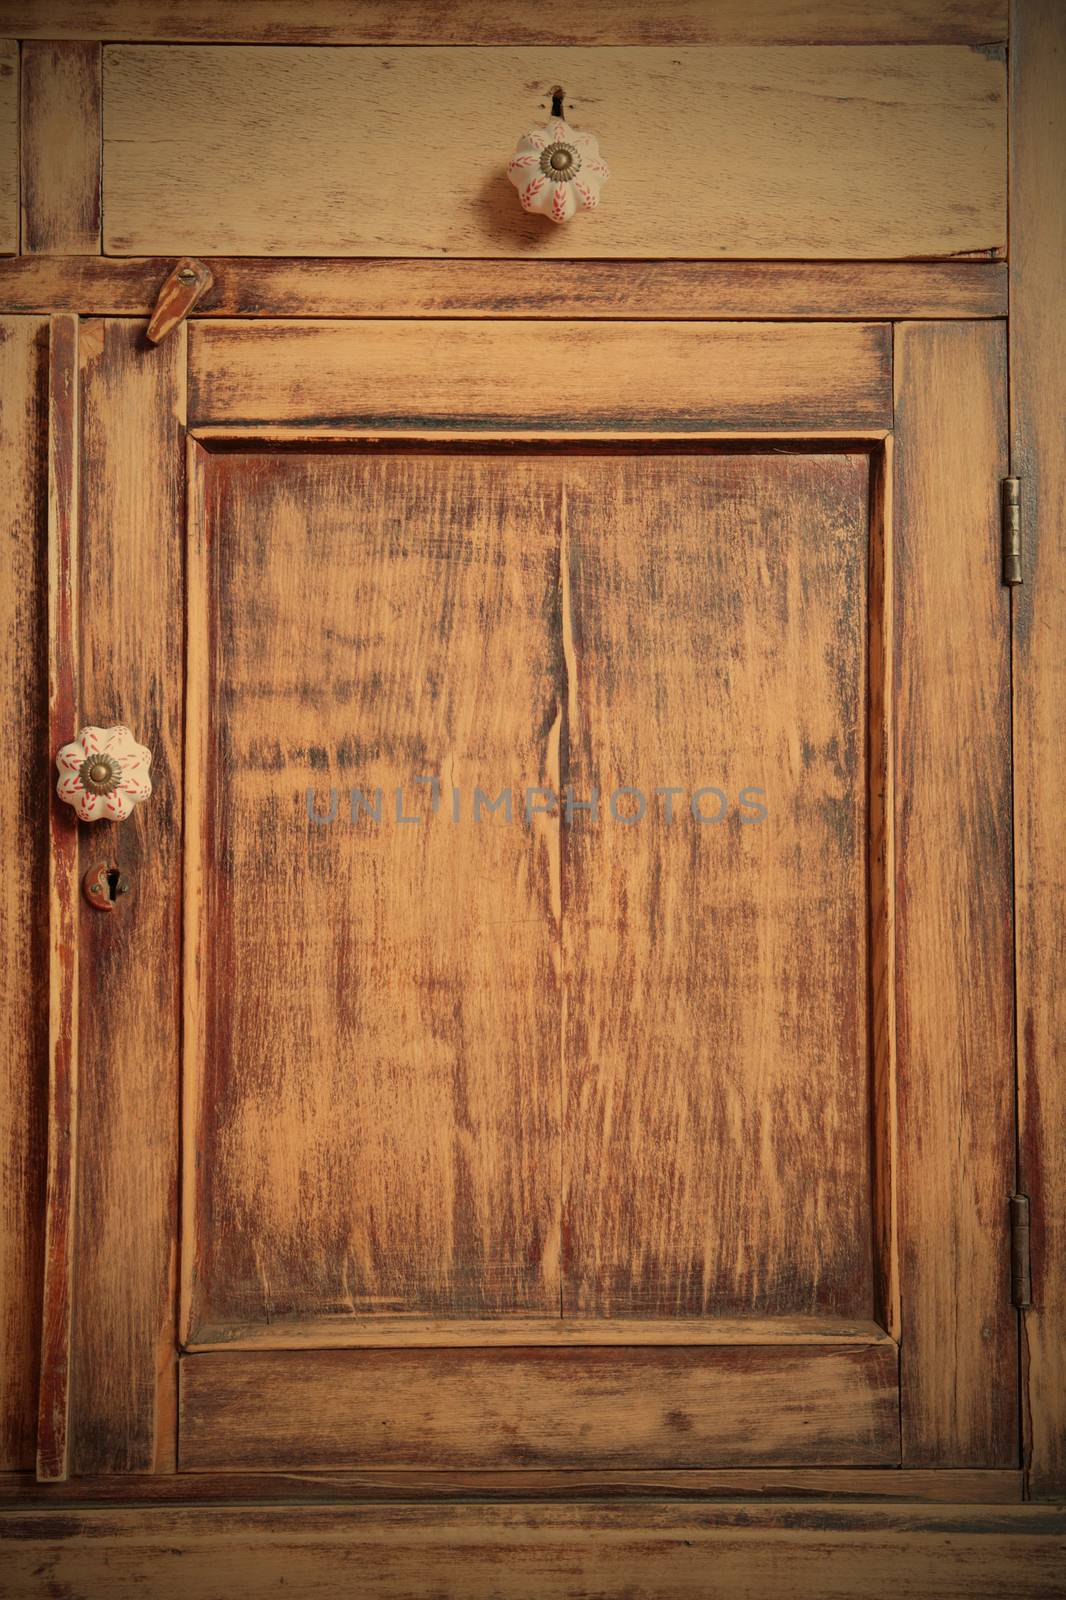 fragment of the antique wooden furniture, instagram image style